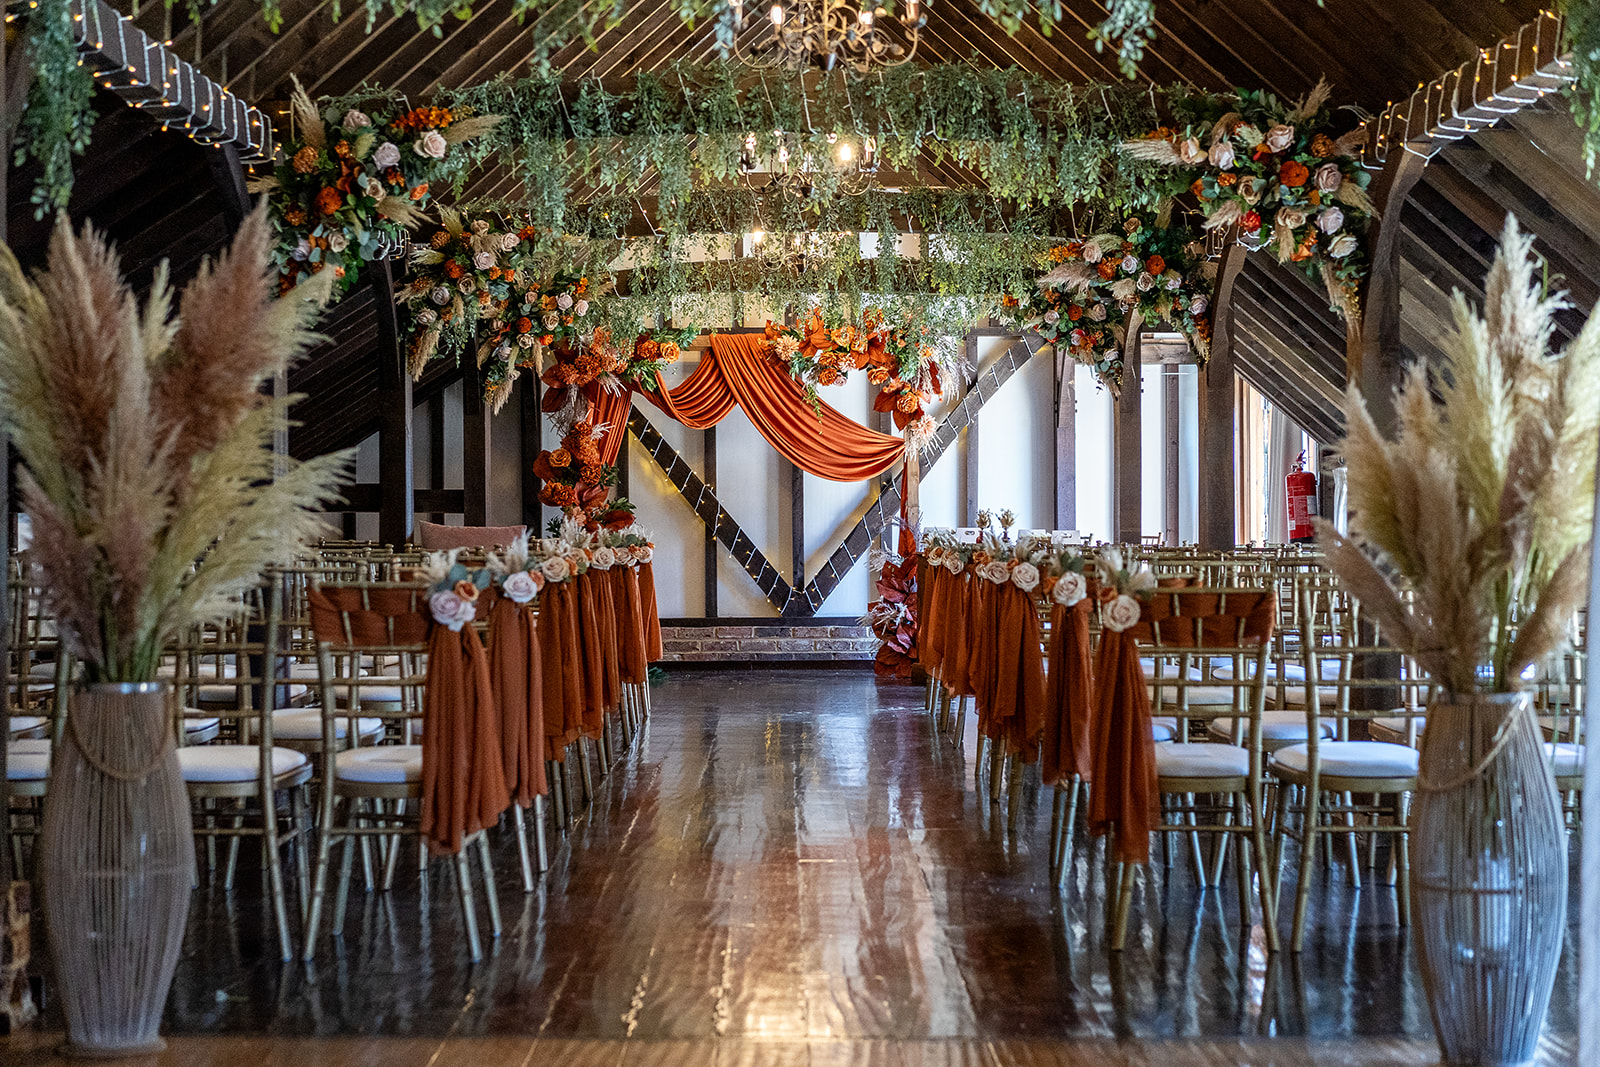 Autumn decor in the barn for a wedding at Blackstock Country Estate